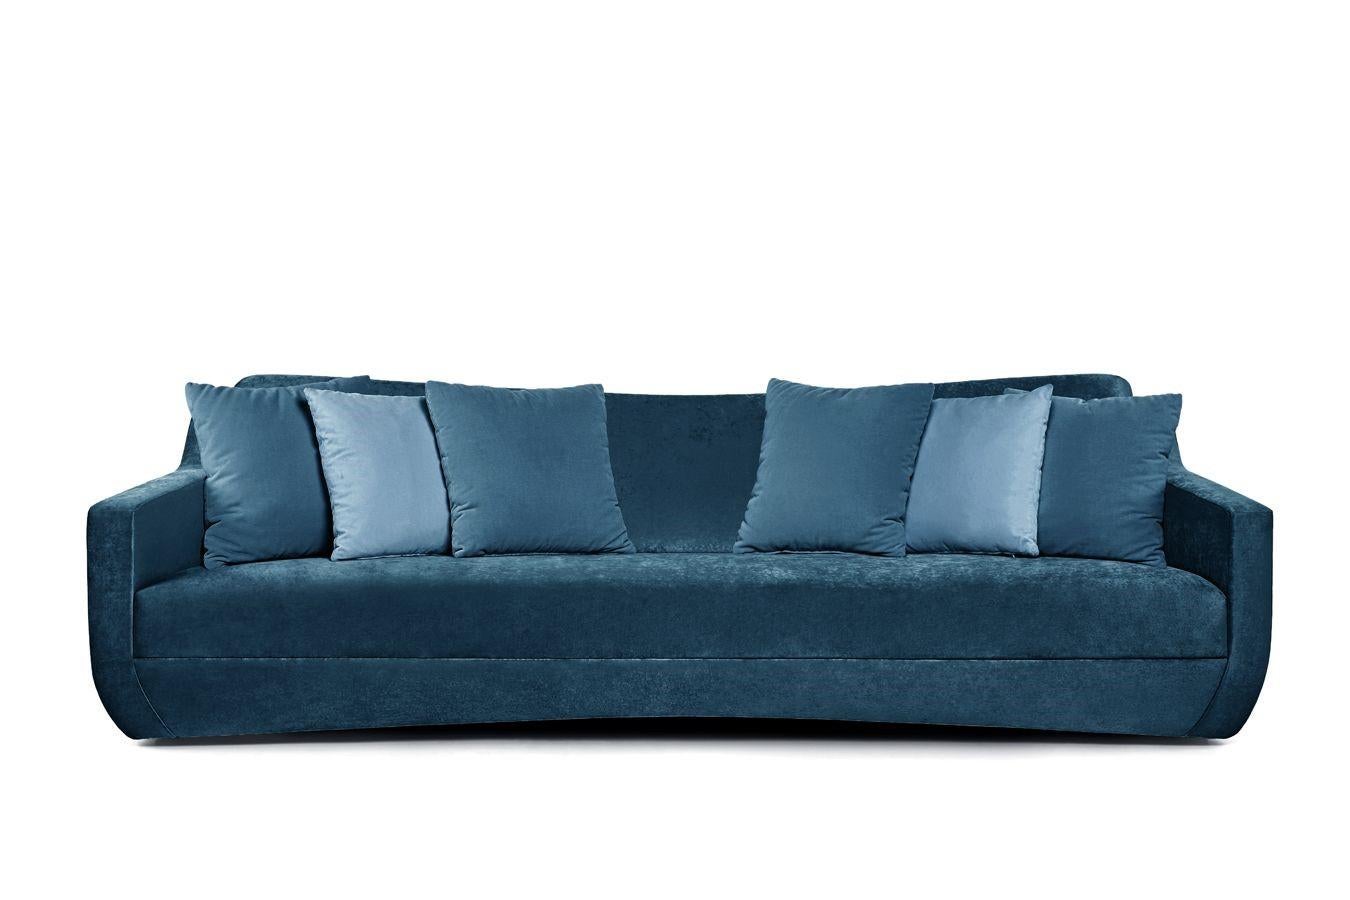 Modern Contemporary Sculptural Sofa with Discreet Seaming For Sale